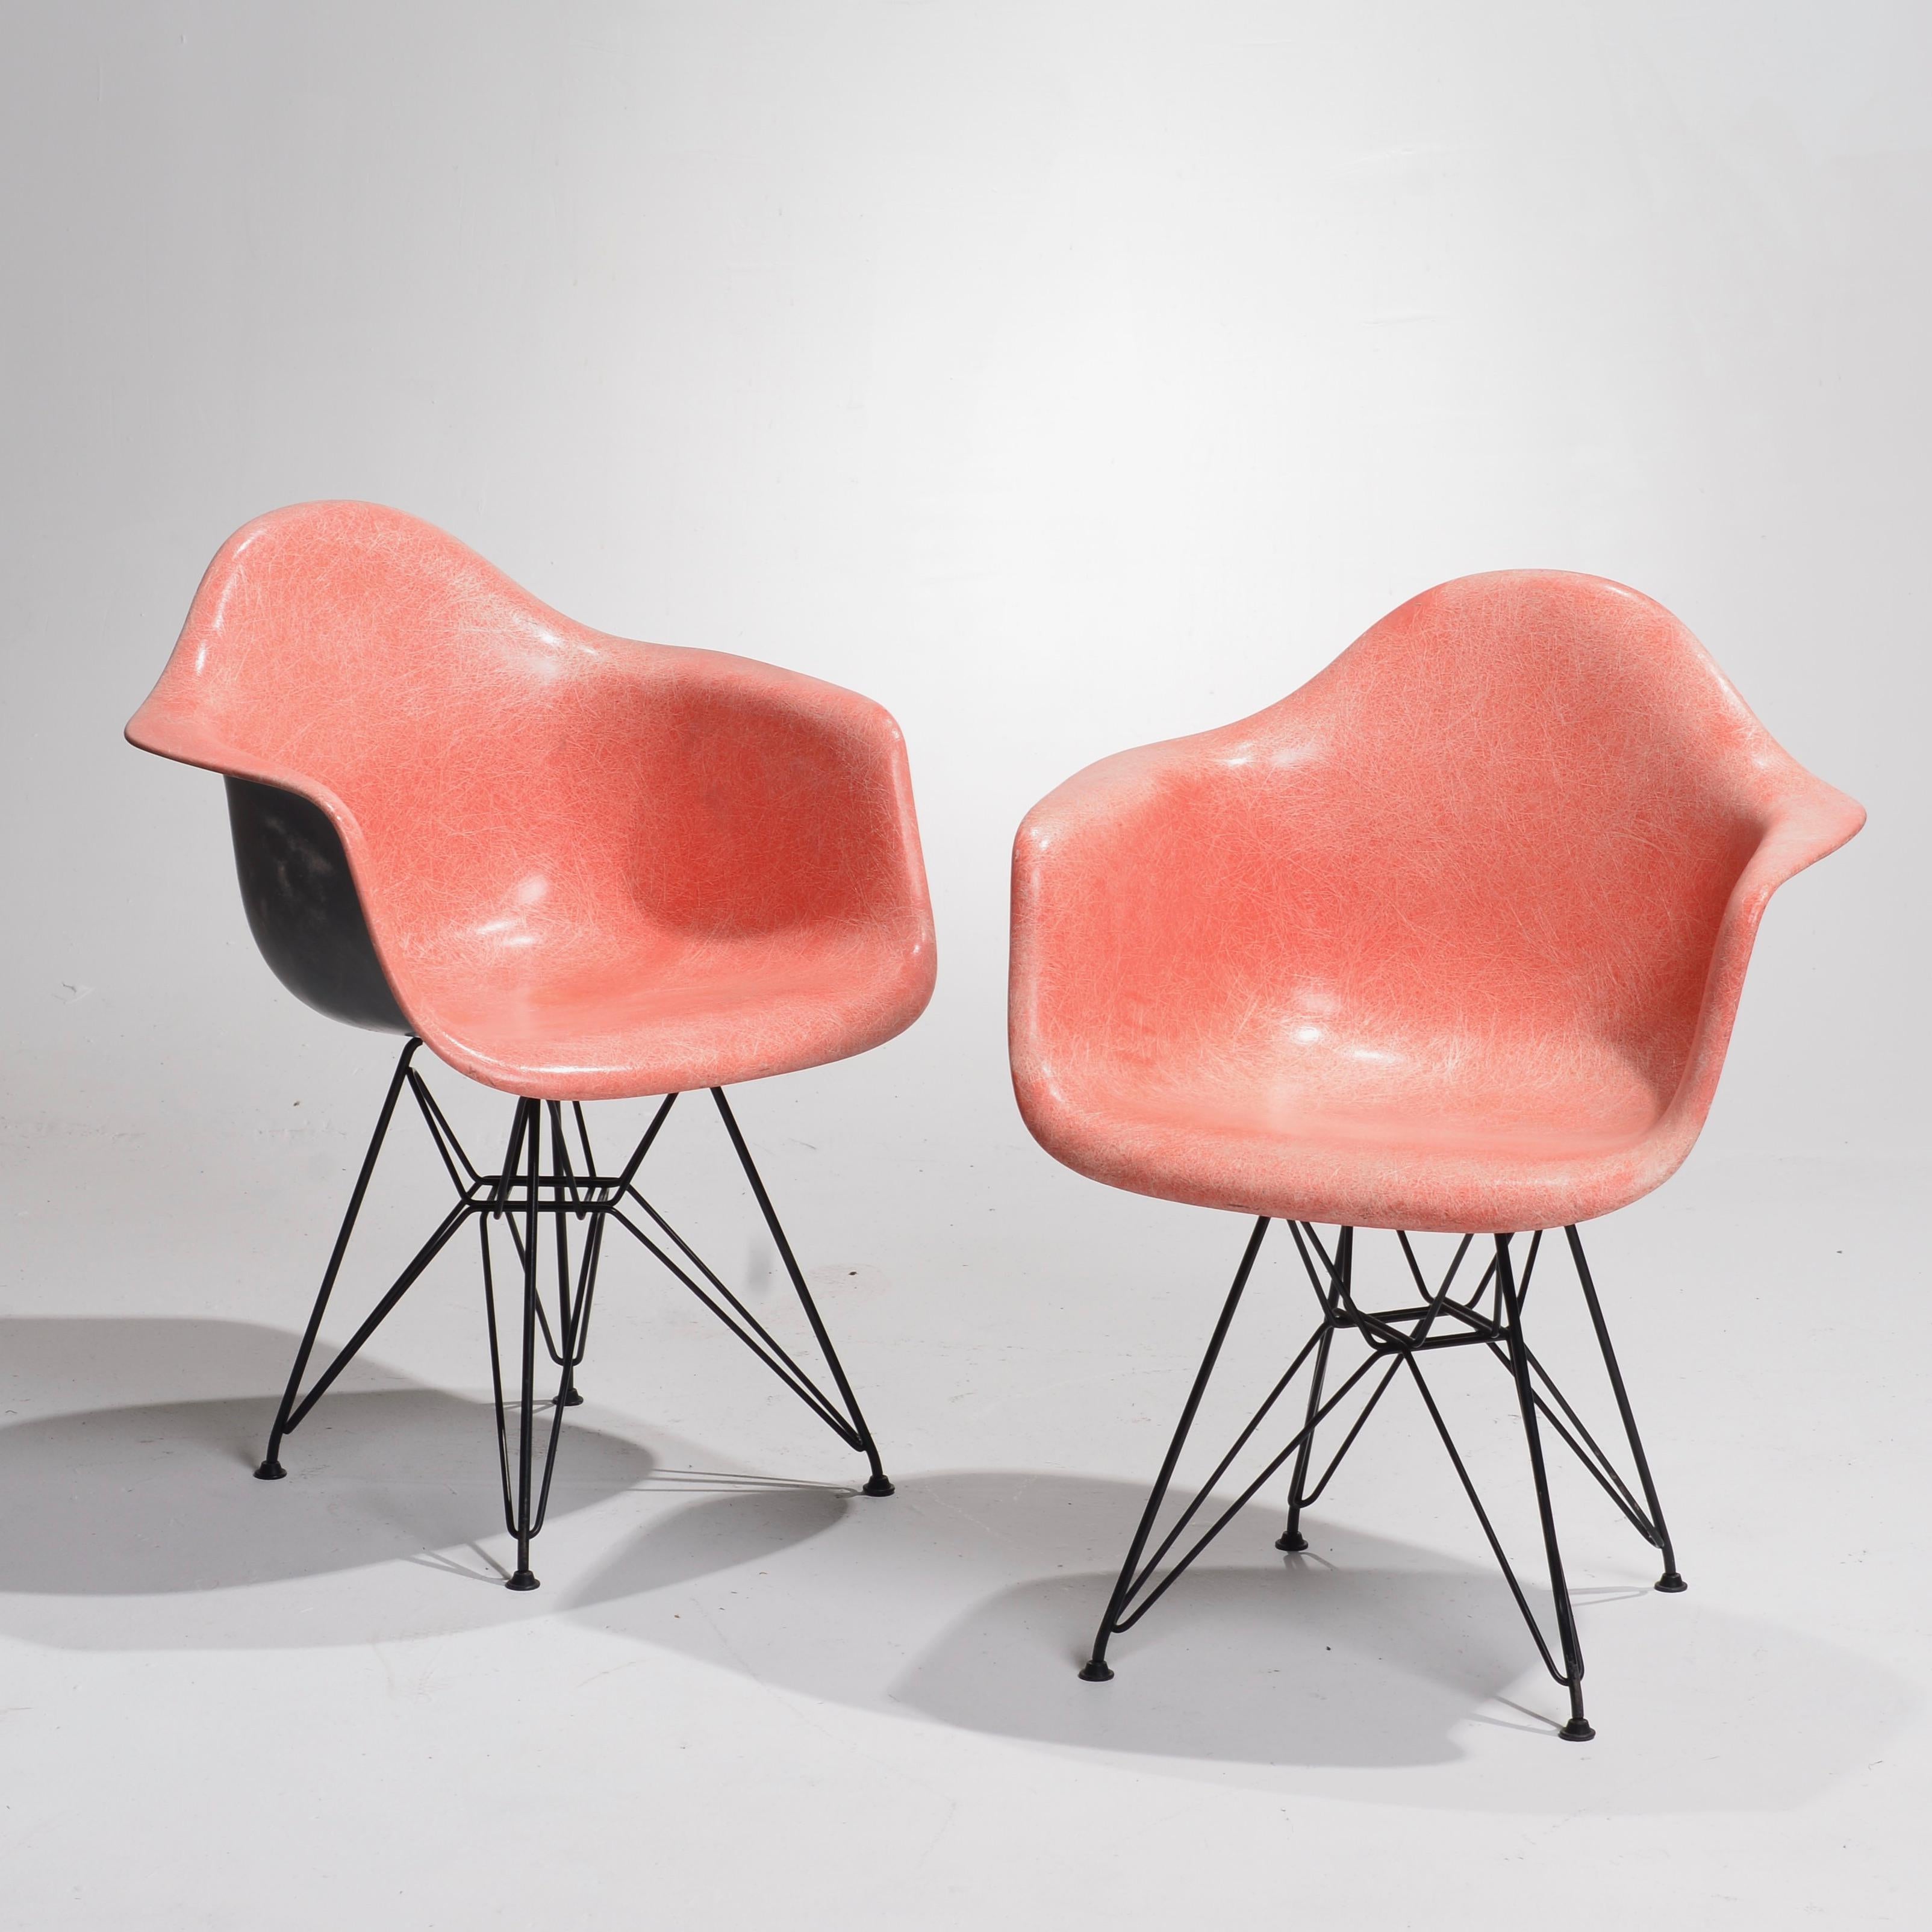 Introducing the Zenith Charles Eames DAR Fiberglass Shell Chairs – Iconic Design, Unmatched Comfort

The Zenith Charles Eames DAR Fiberglass Shell Chairs are a testament to the timeless beauty and visionary design of Charles and Ray Eames. These